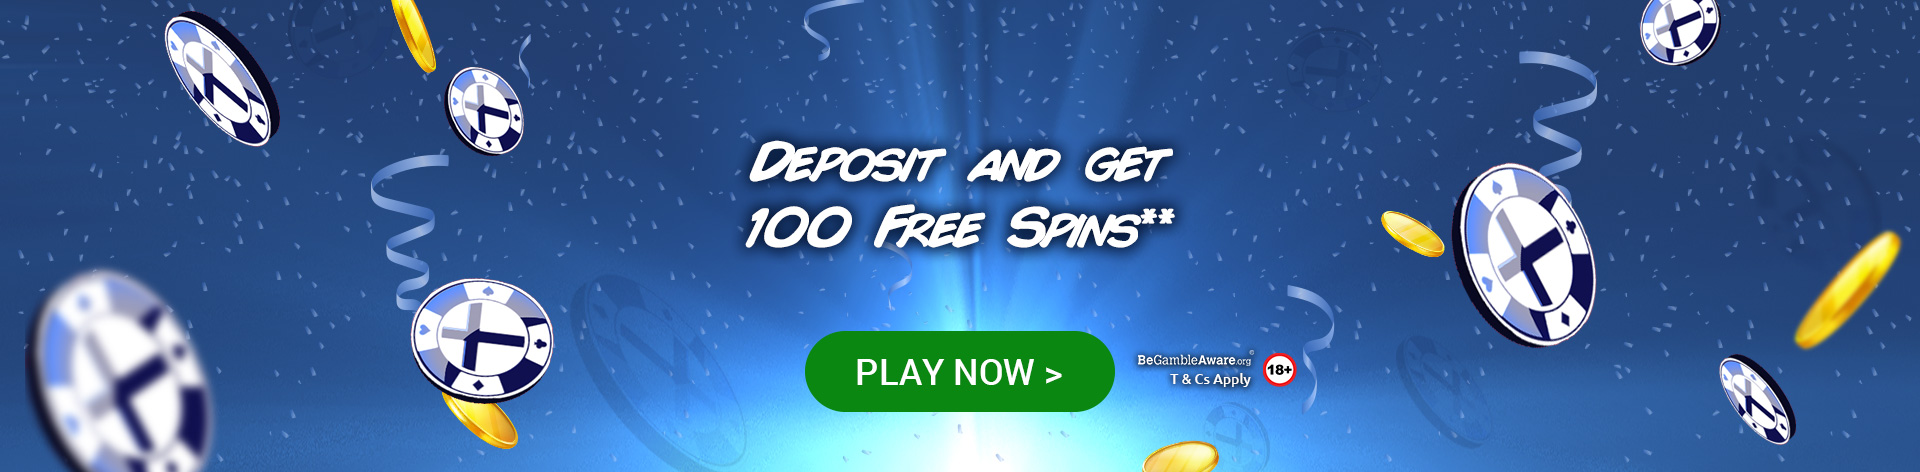 Deposit and get 100 Free Spins**